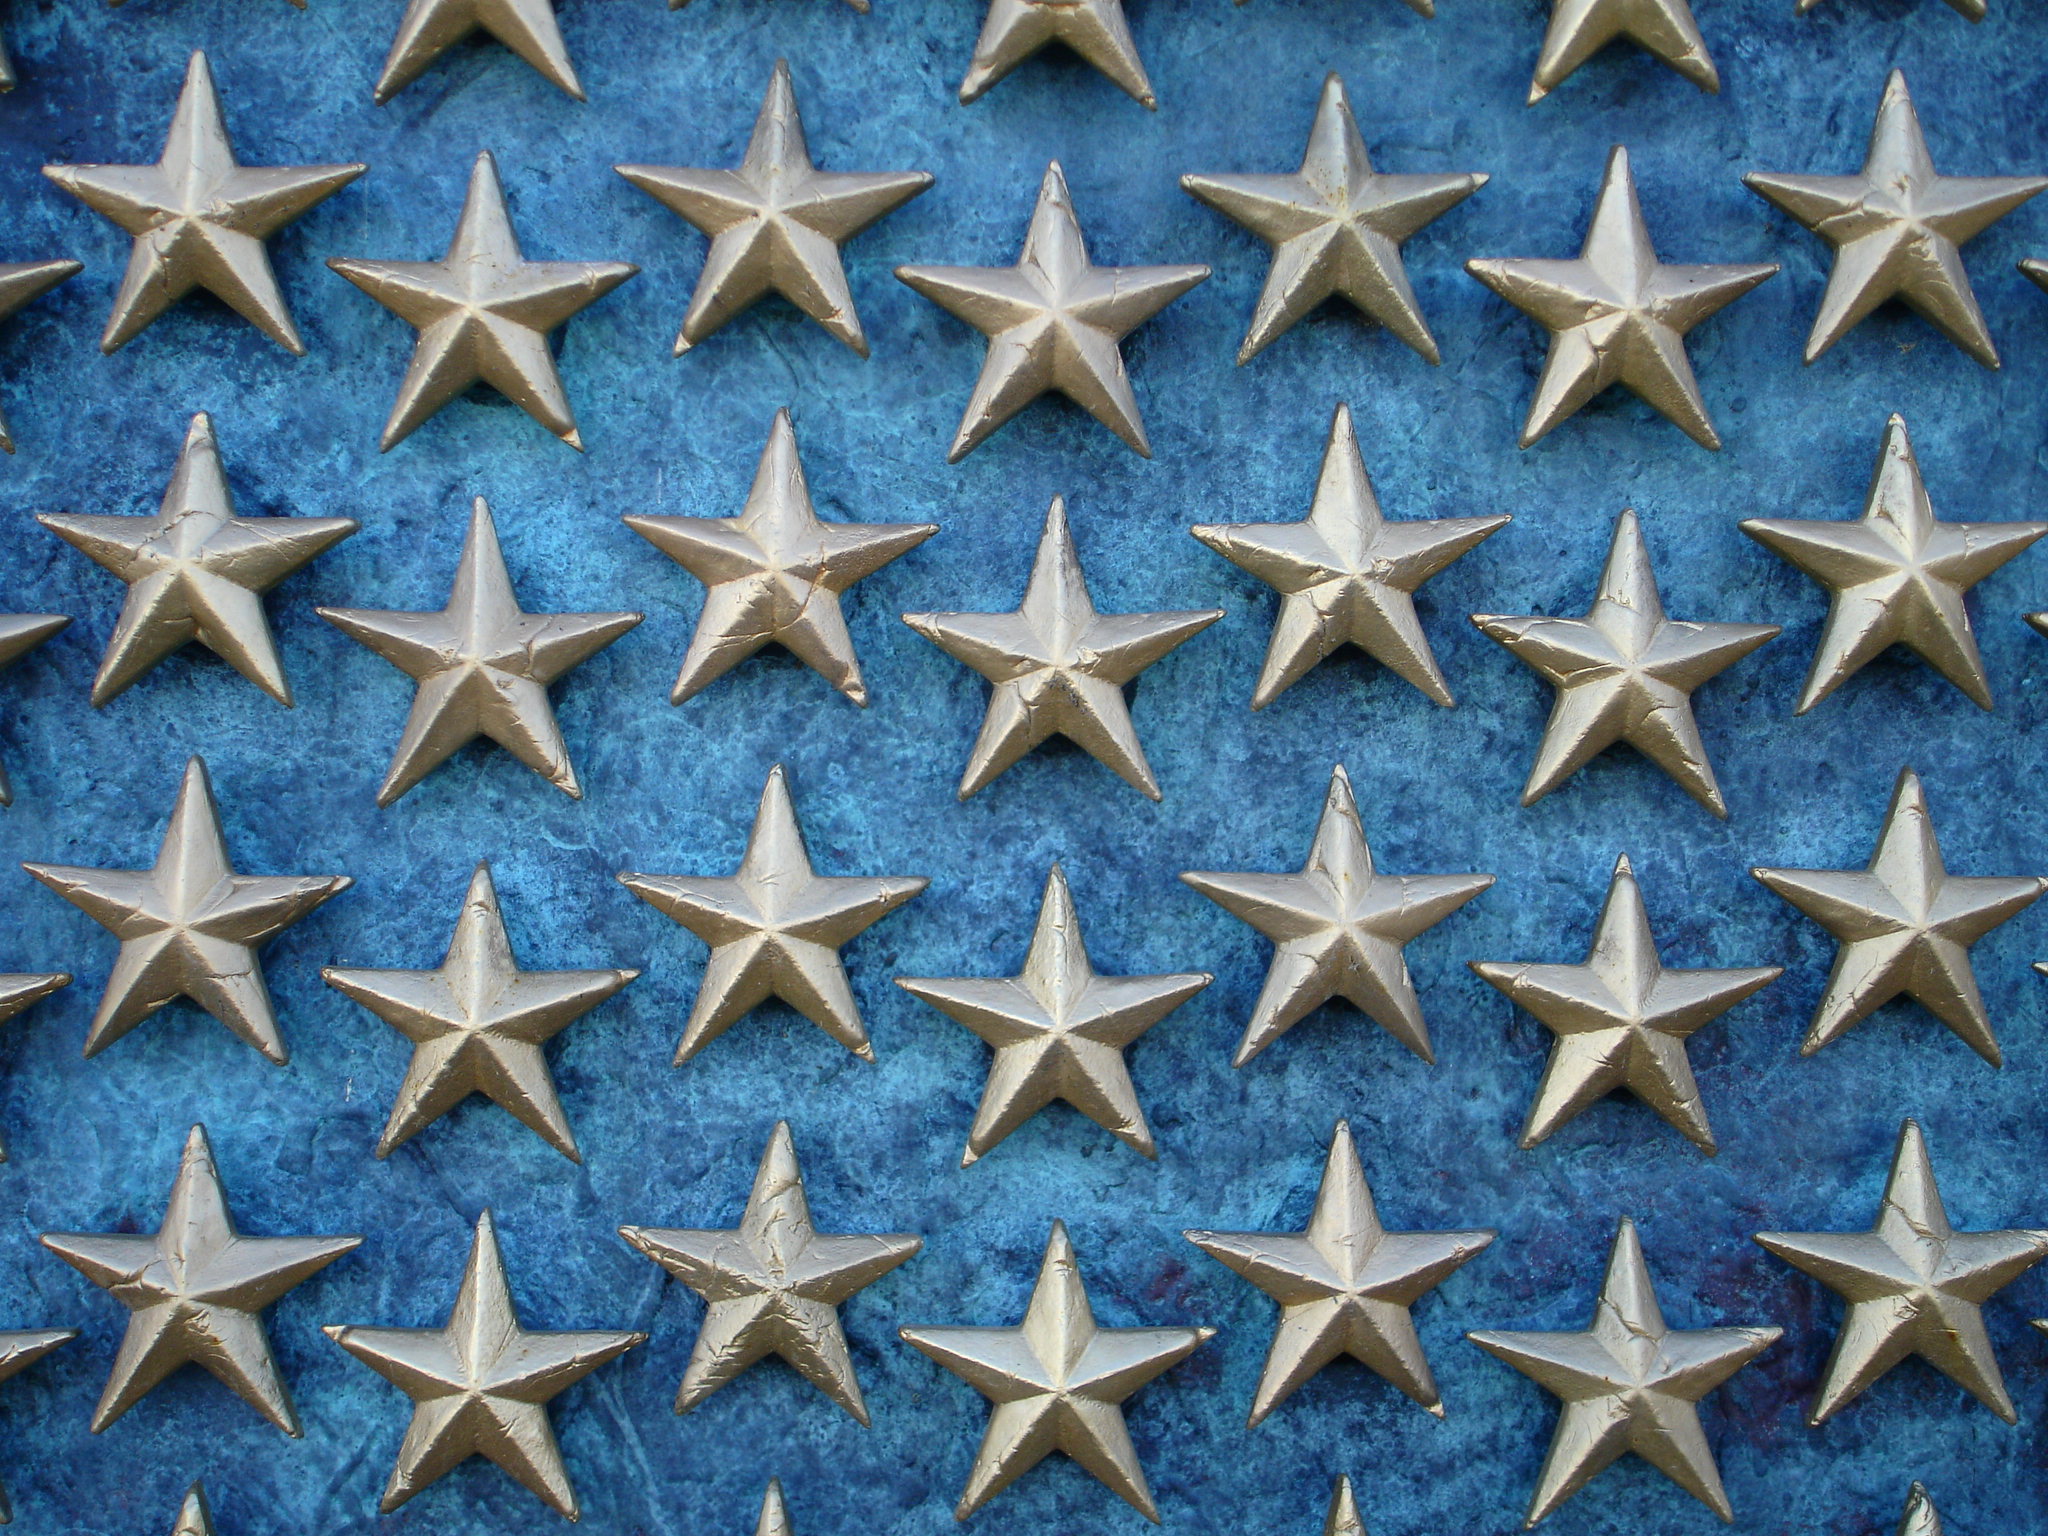 A field of gold five-pointed stars on a blue background.